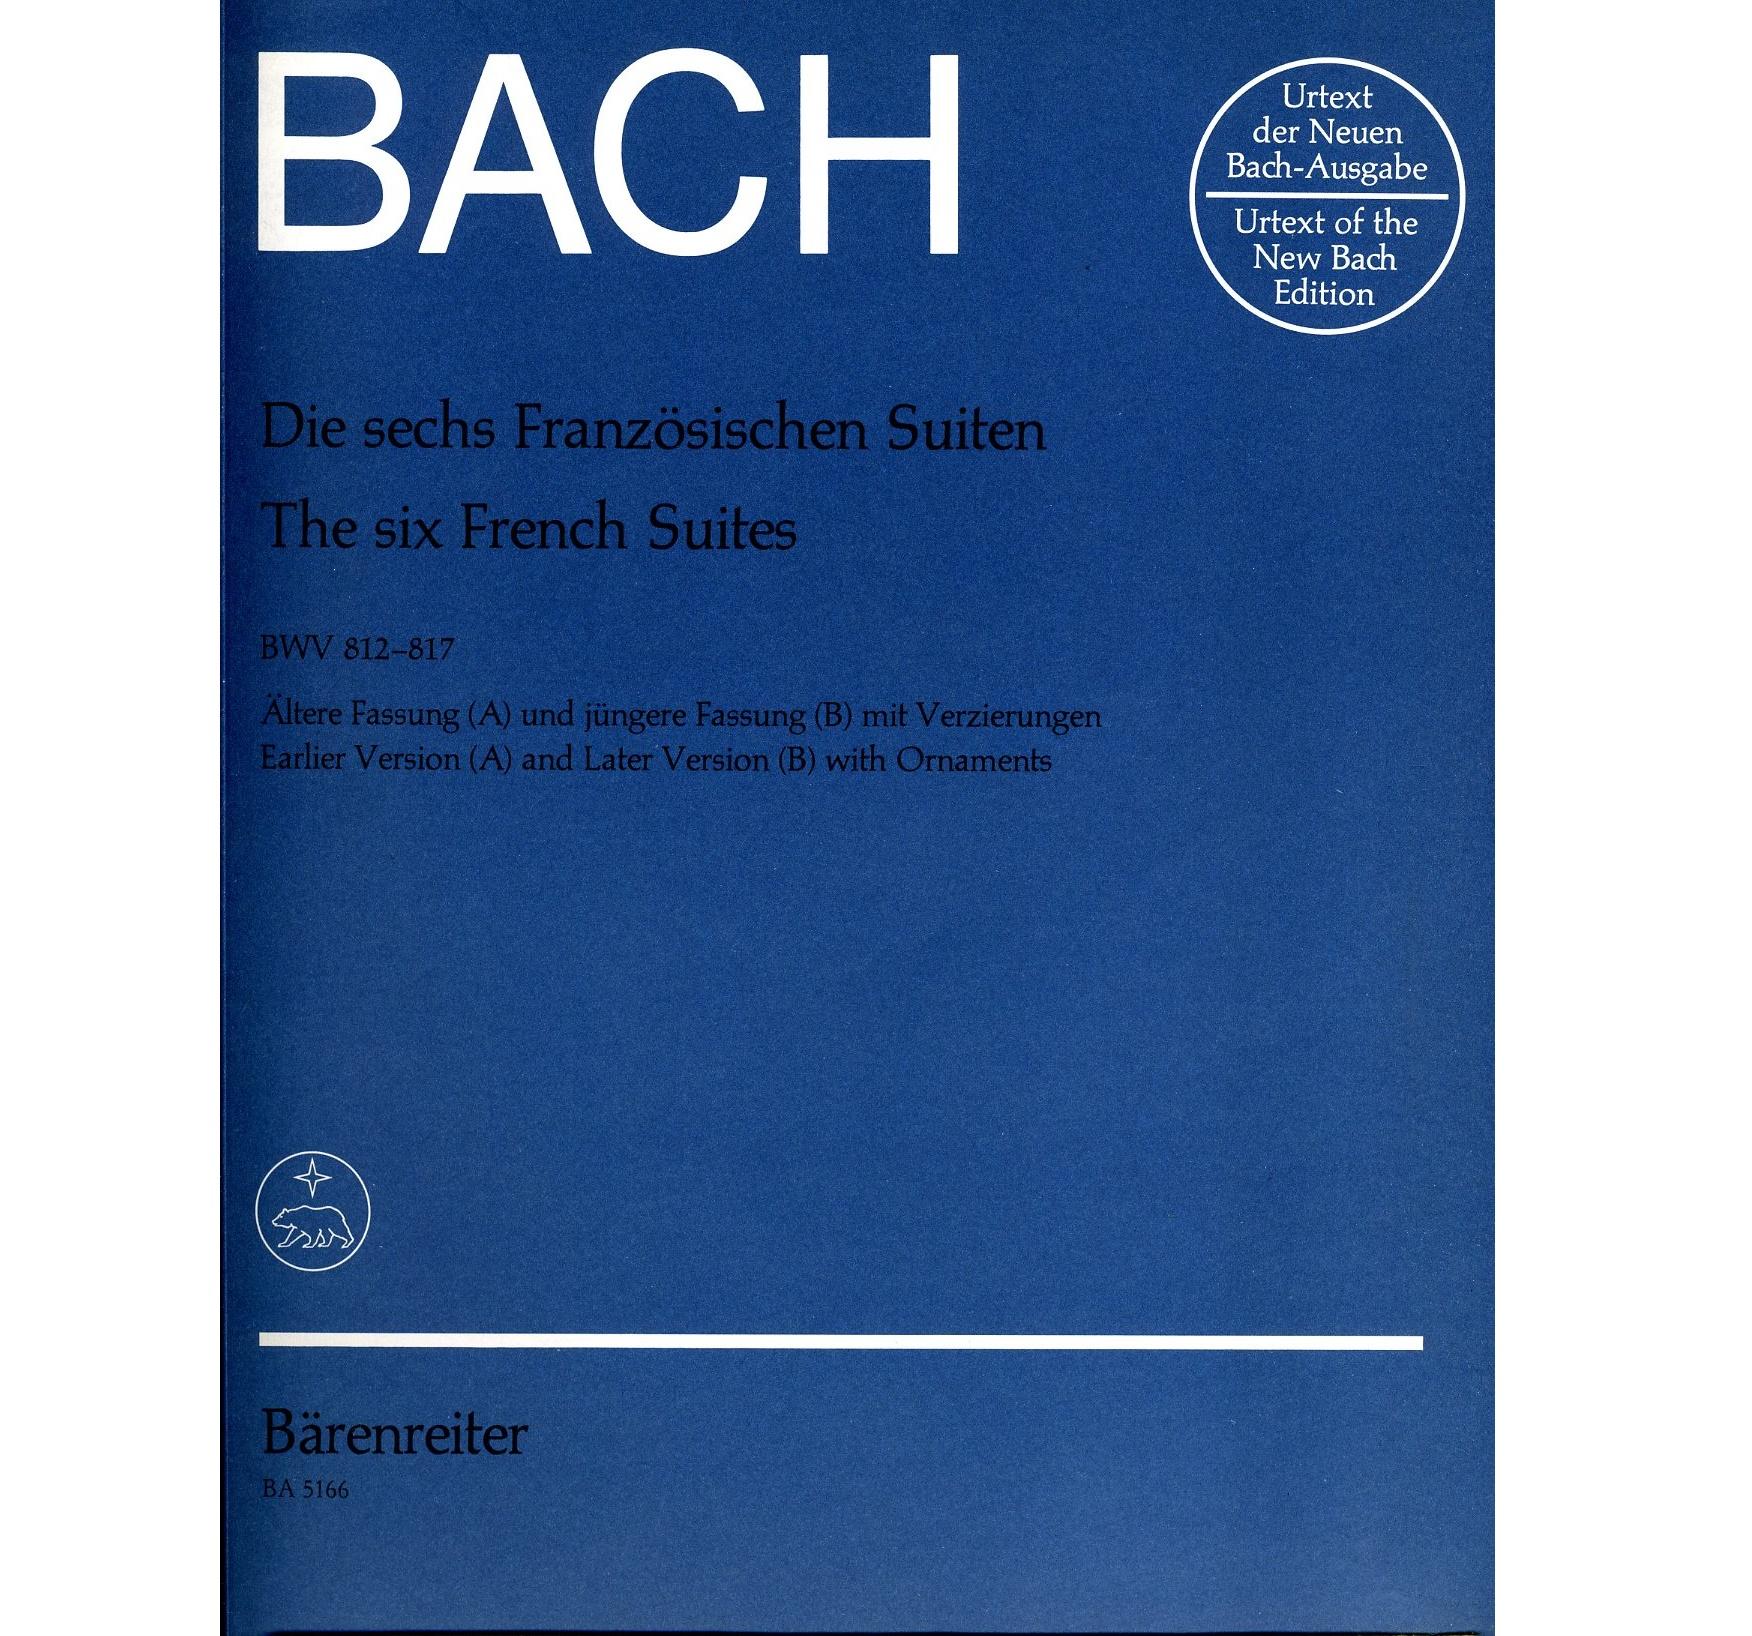 Bach The six French Suites - Barenreiter